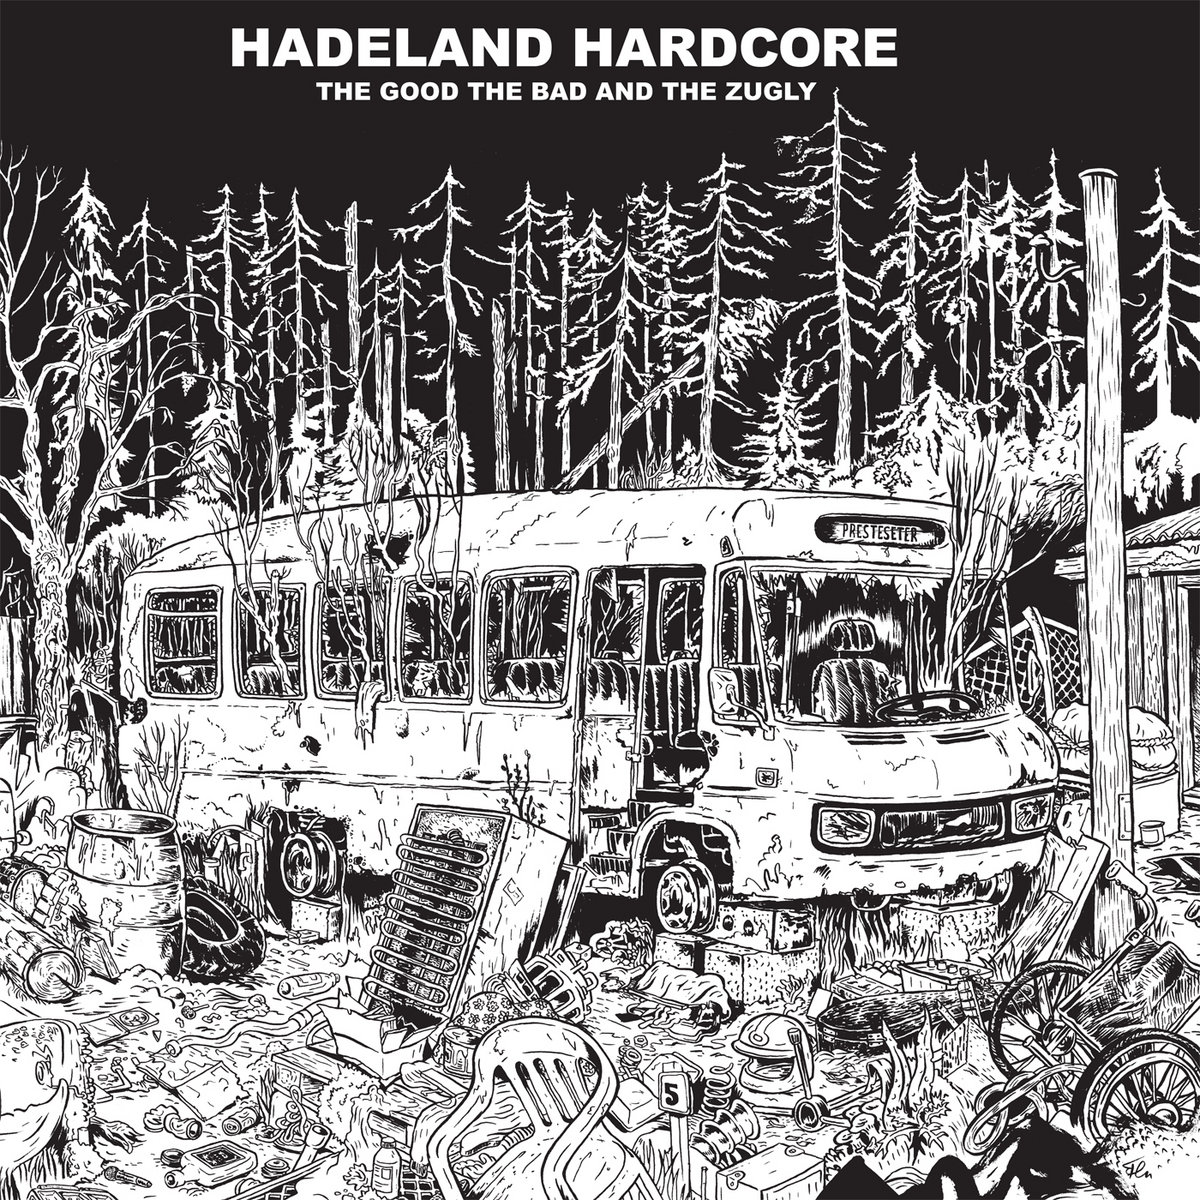 Good The Bad And The Zugly, The - Hadeland Hardcore (Transparent Yellow) - LP